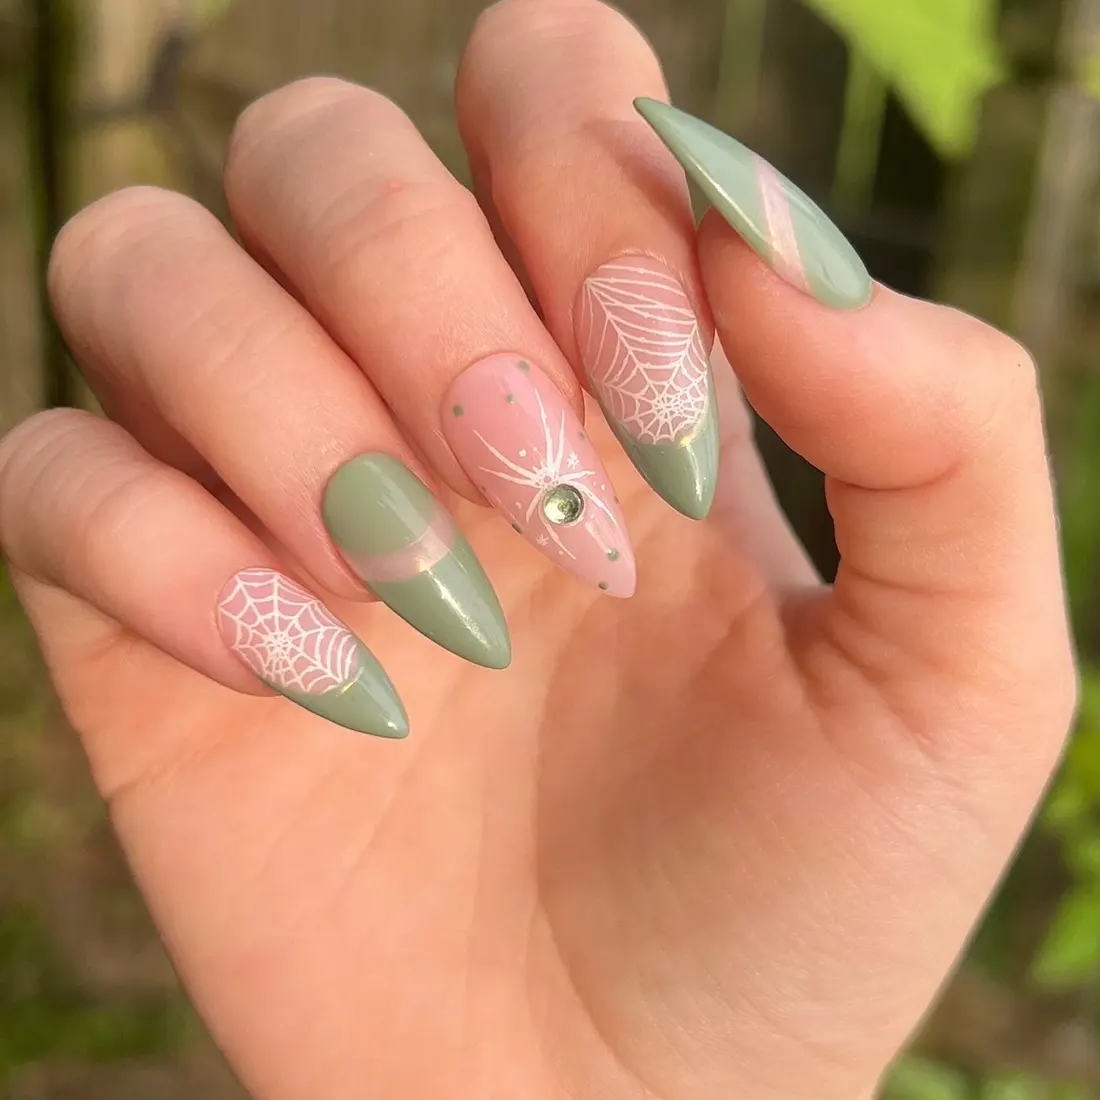 Closeup of green spider nail art design | 9 Witchy Nail Designs You Can Buy as Press-Ons on Etsy | Slashed Beauty